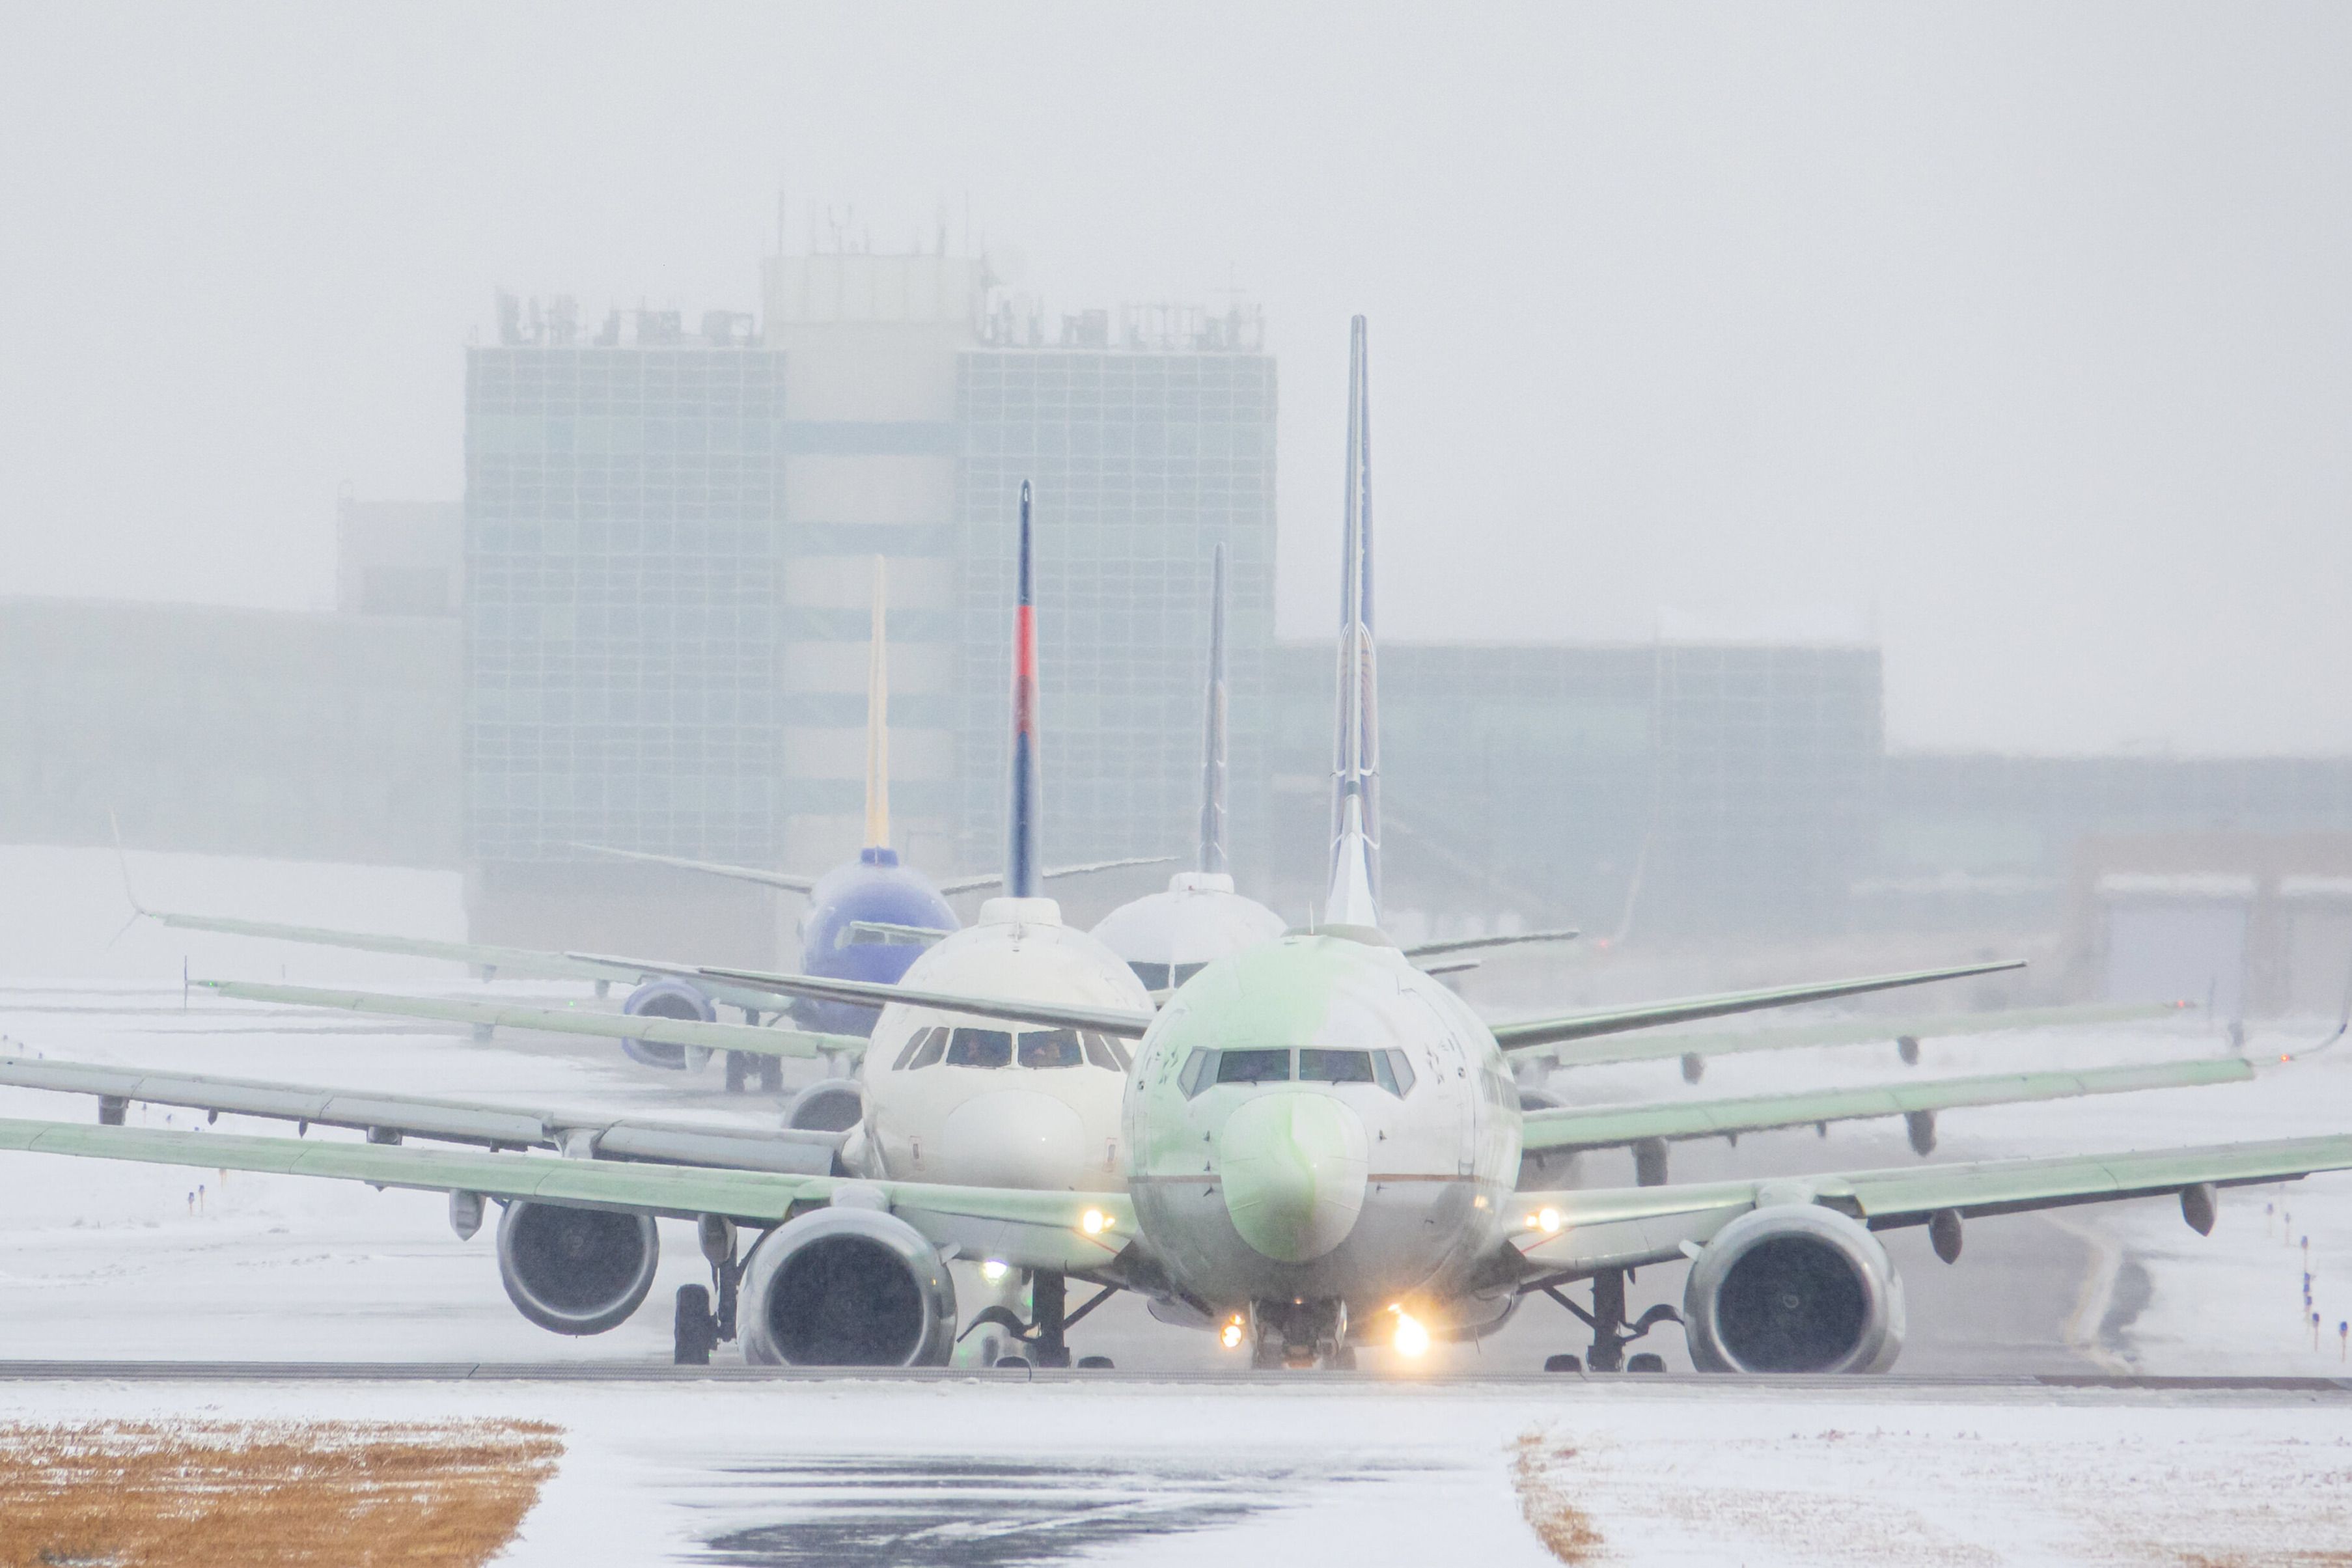 Planes departing in the snow